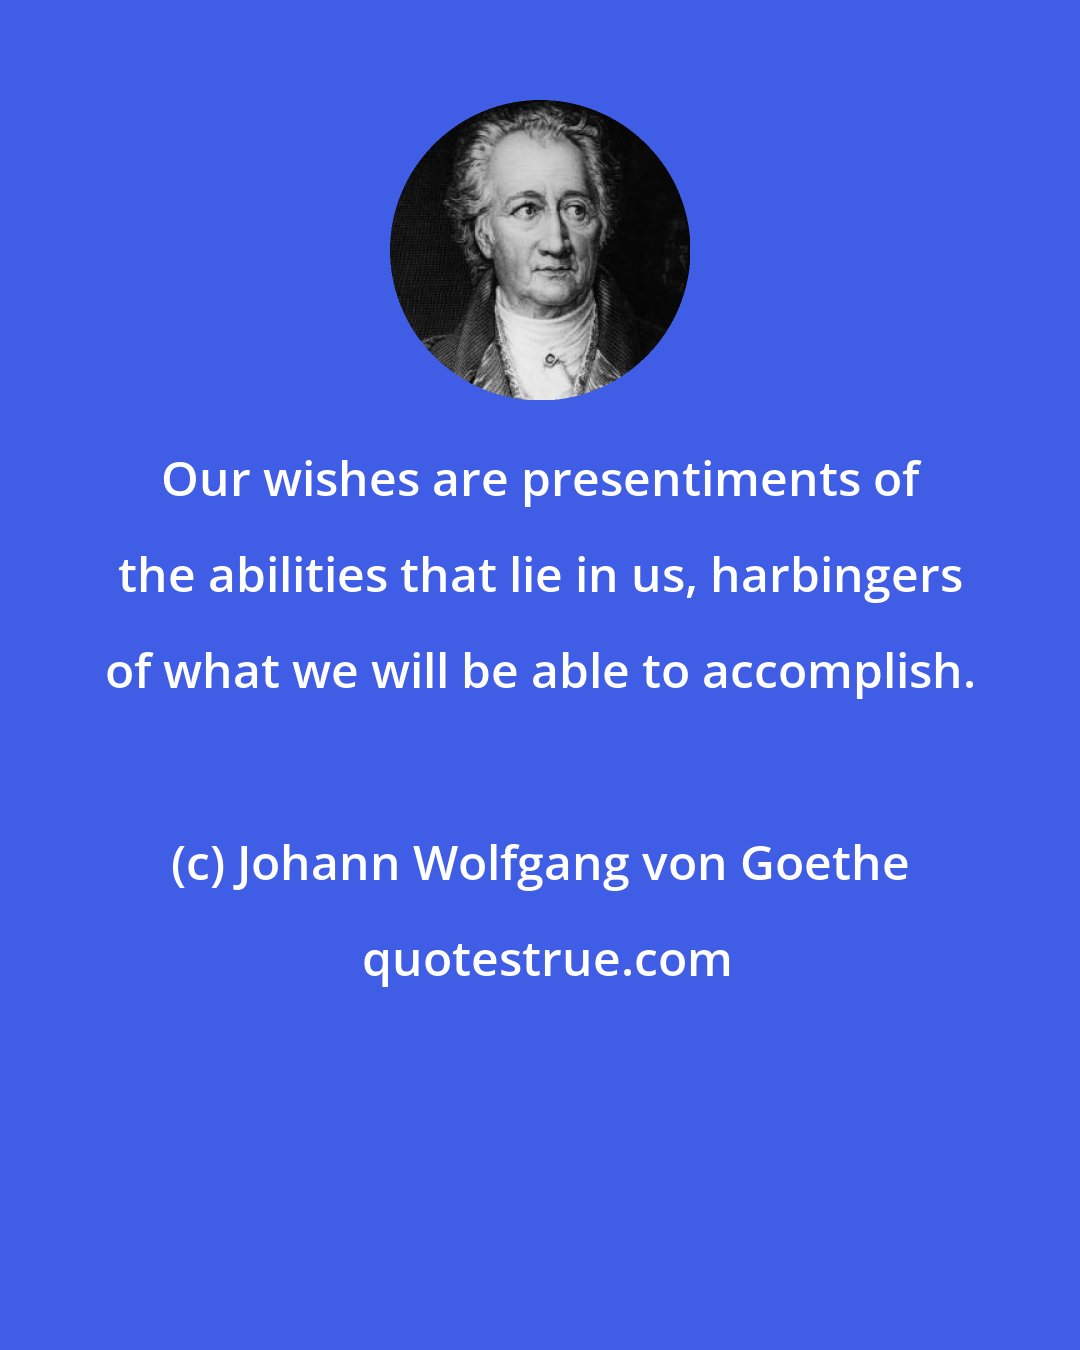 Johann Wolfgang von Goethe: Our wishes are presentiments of the abilities that lie in us, harbingers of what we will be able to accomplish.